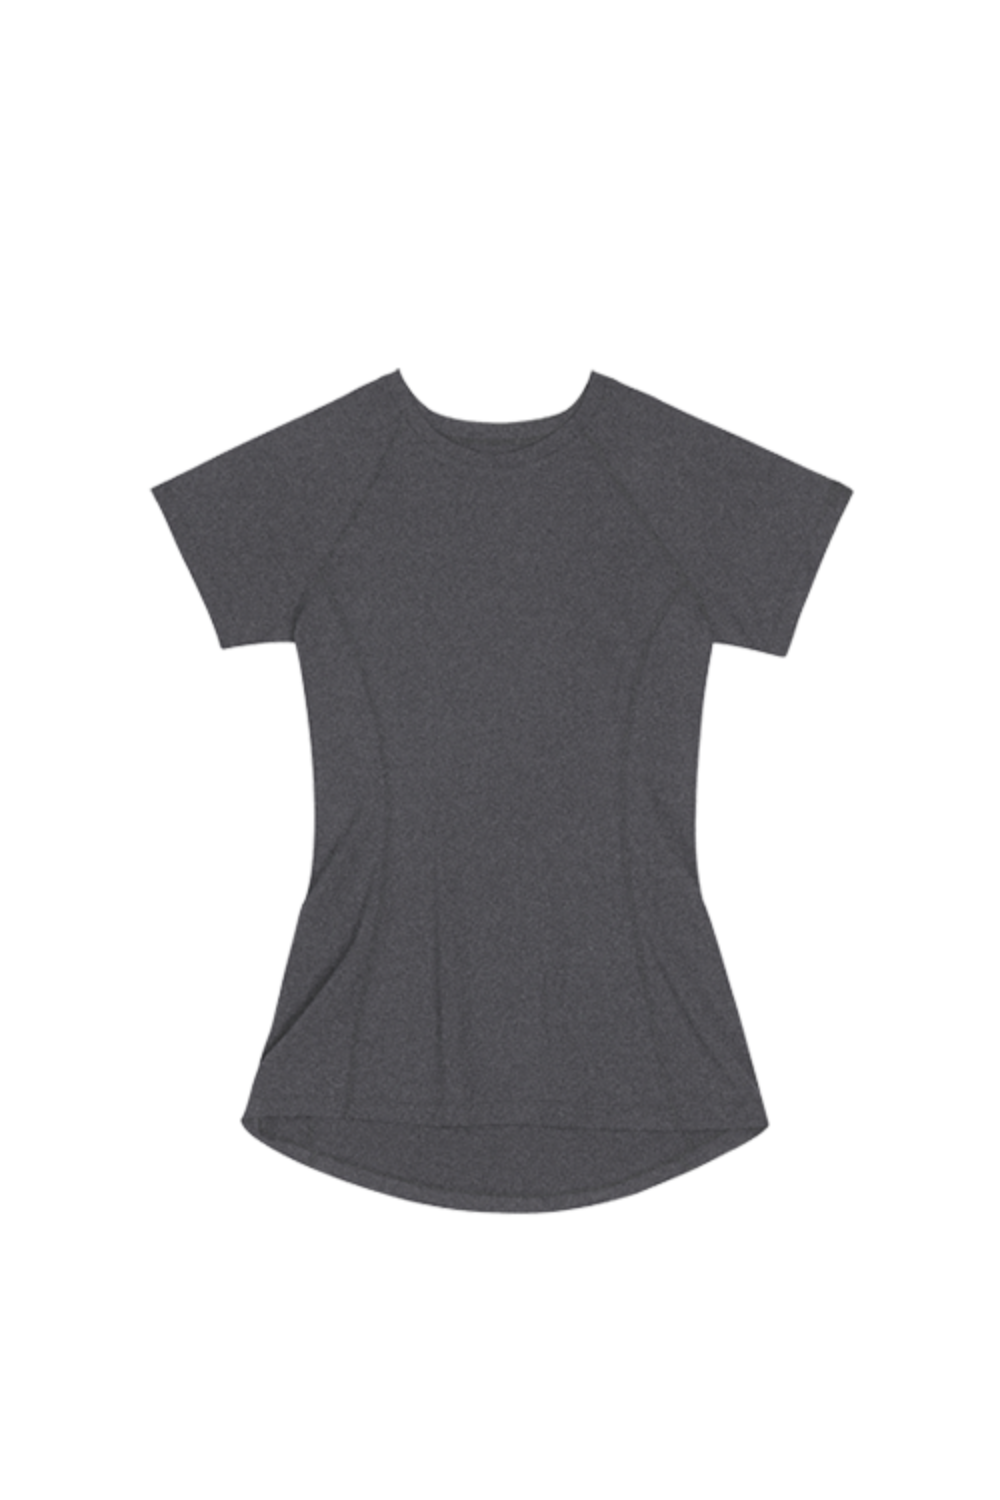 Airtouch Pace Melange Short Sleeve